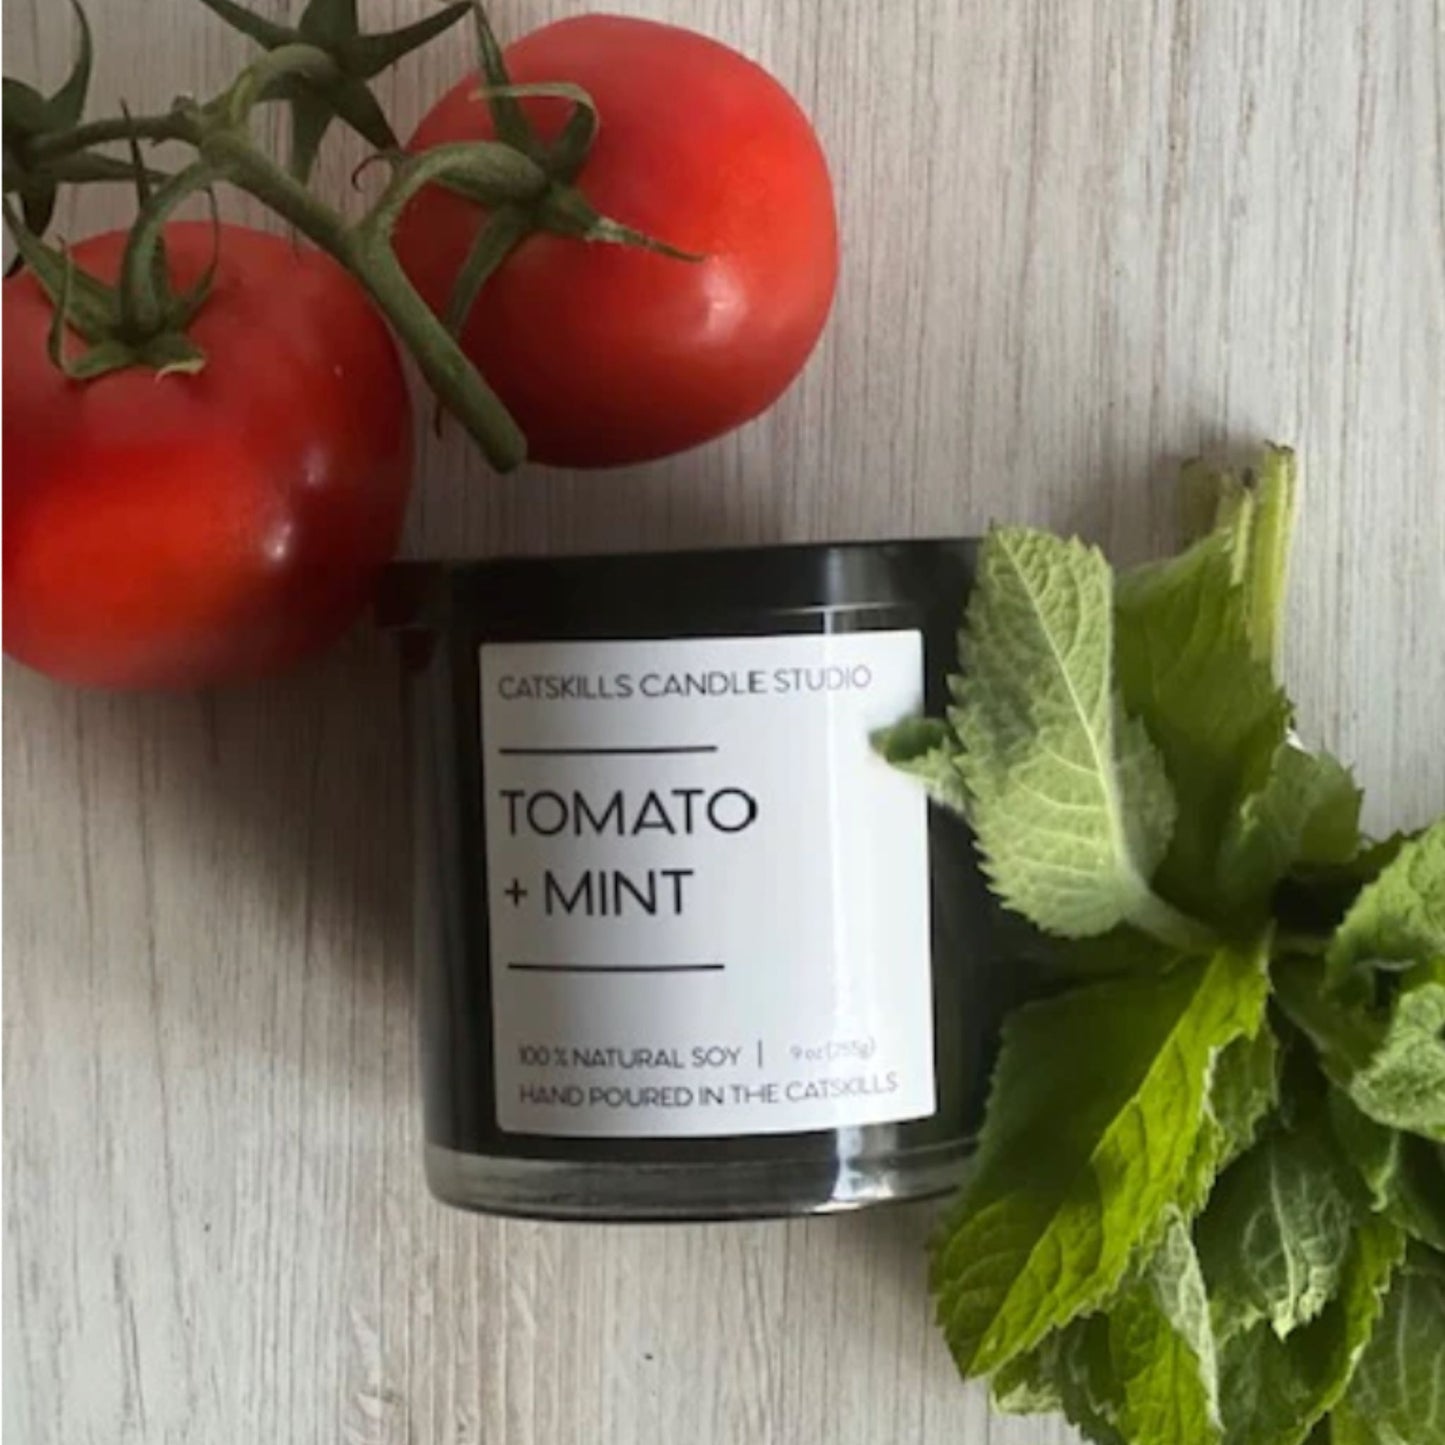 Tomato + Mint Candle